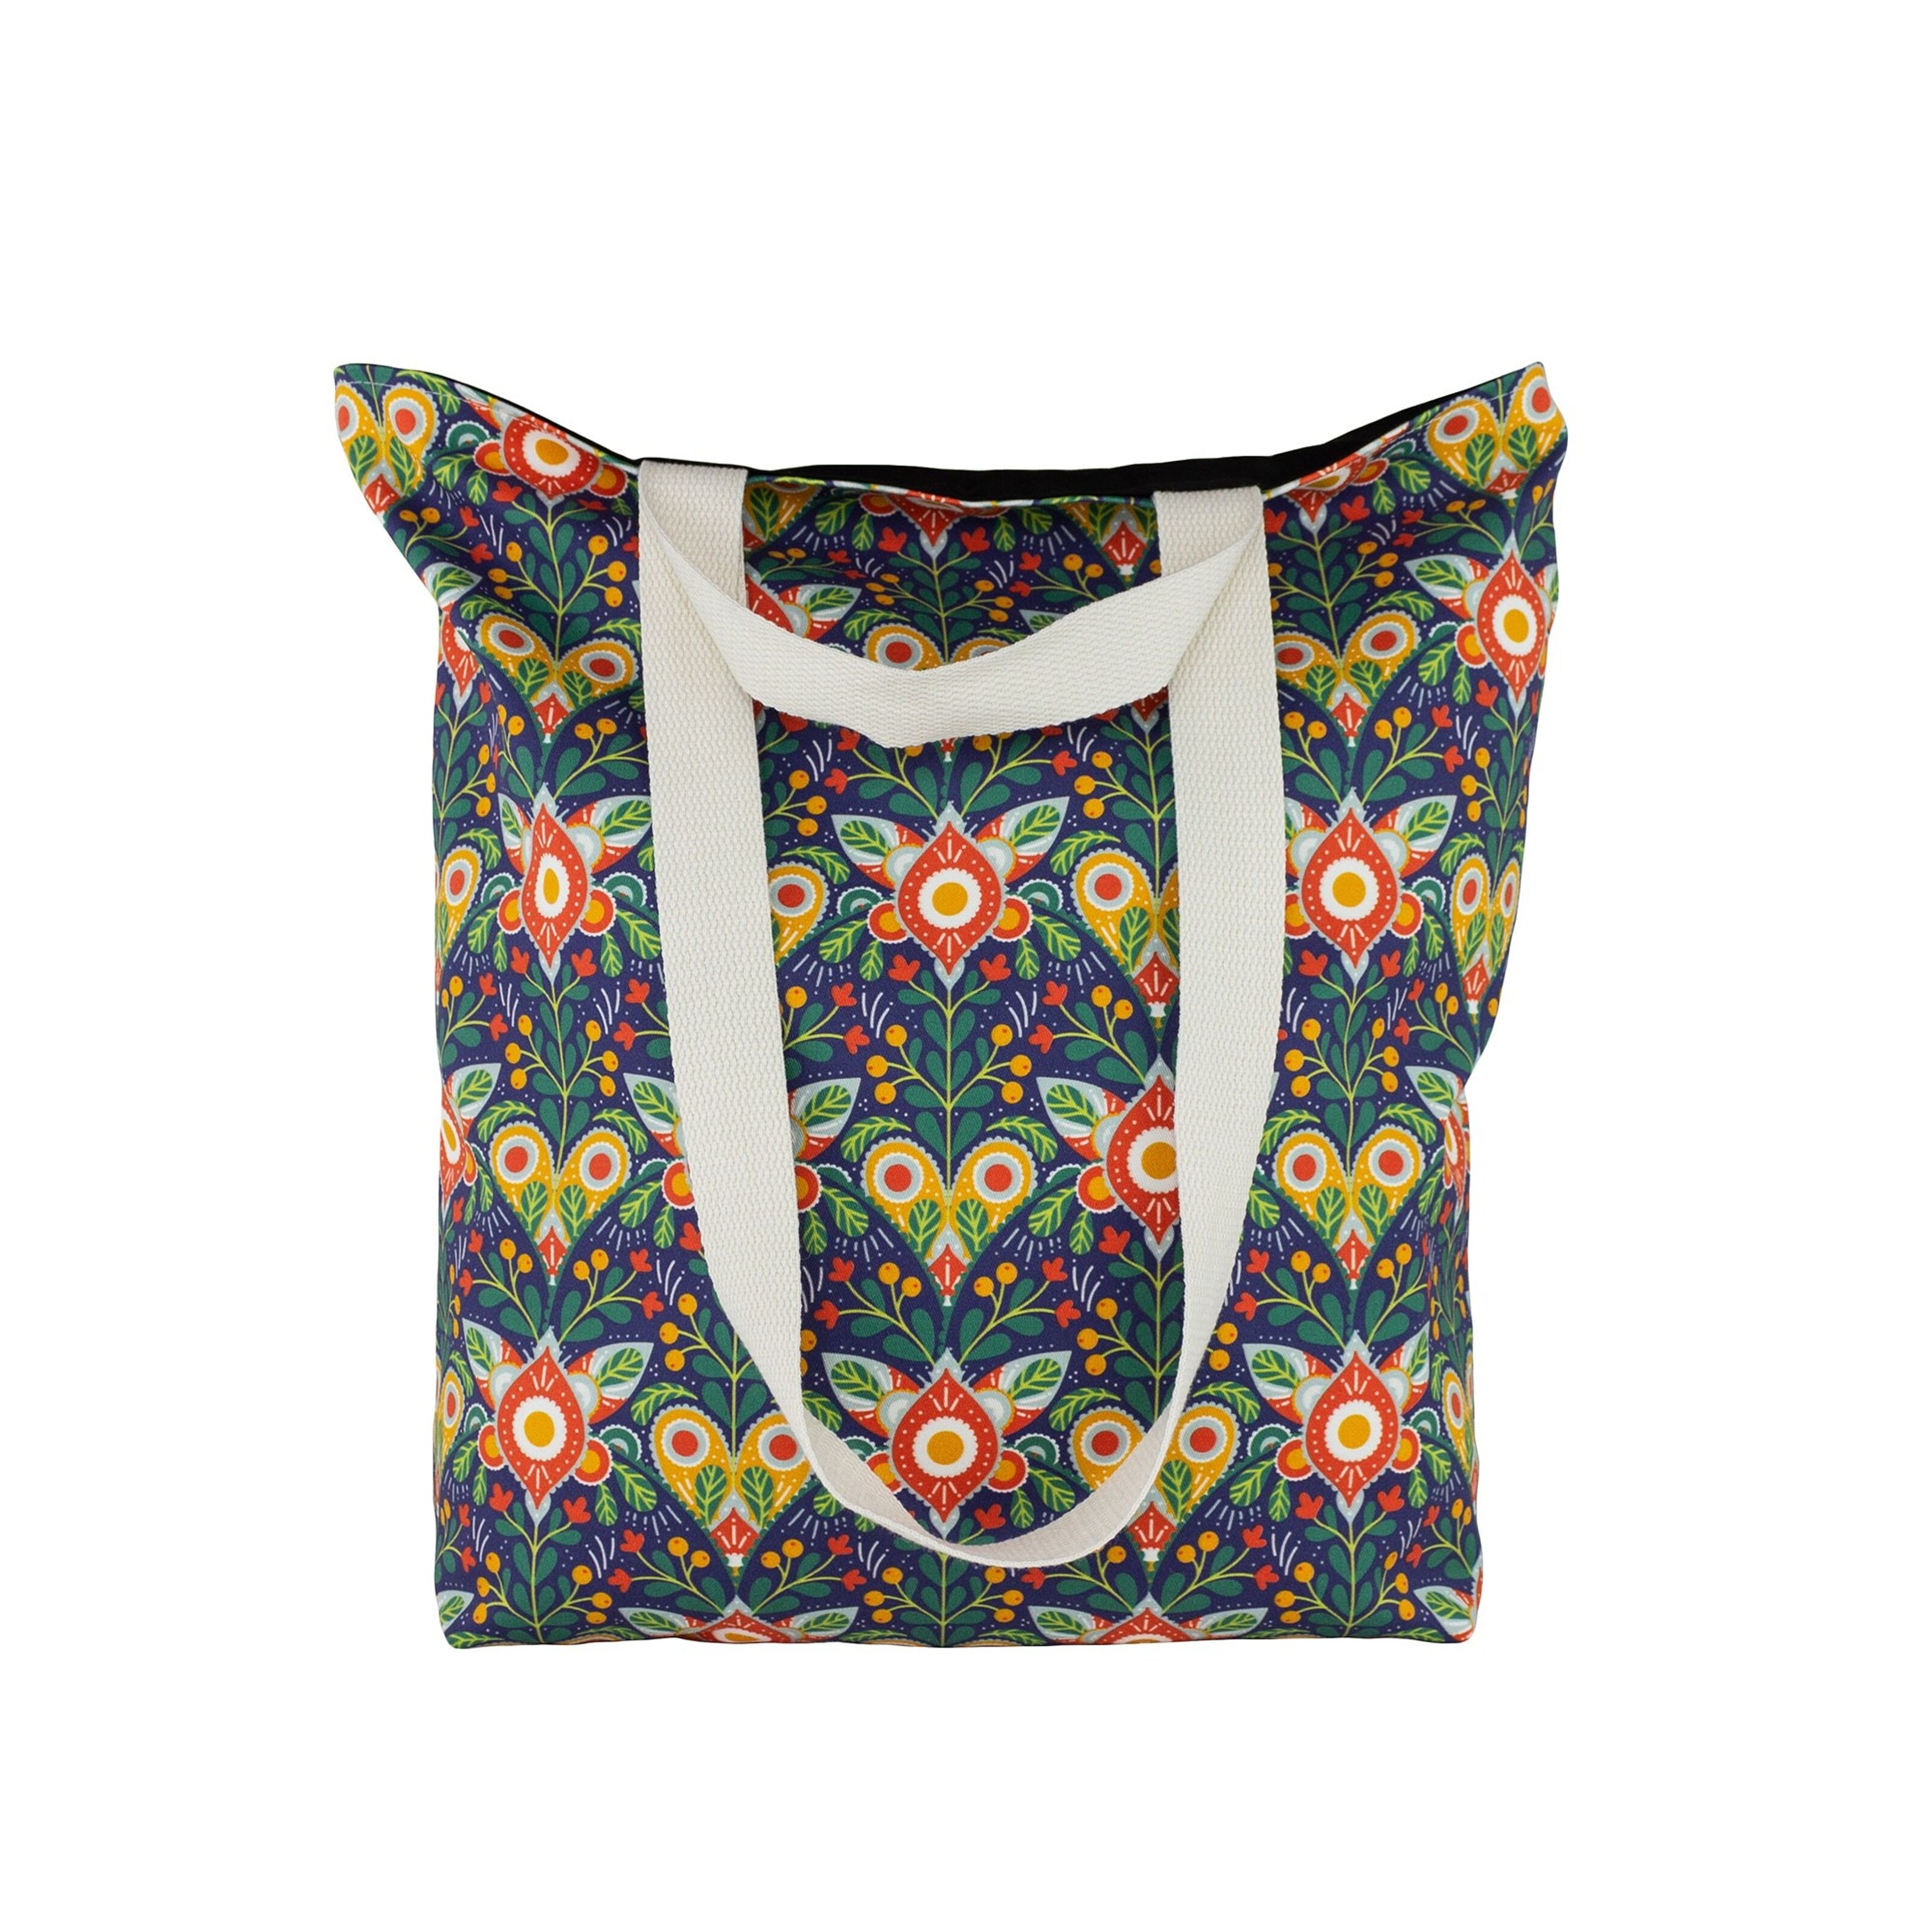 Linen Origami Bag. cotton Butterflies And Flowers, Tote Bag